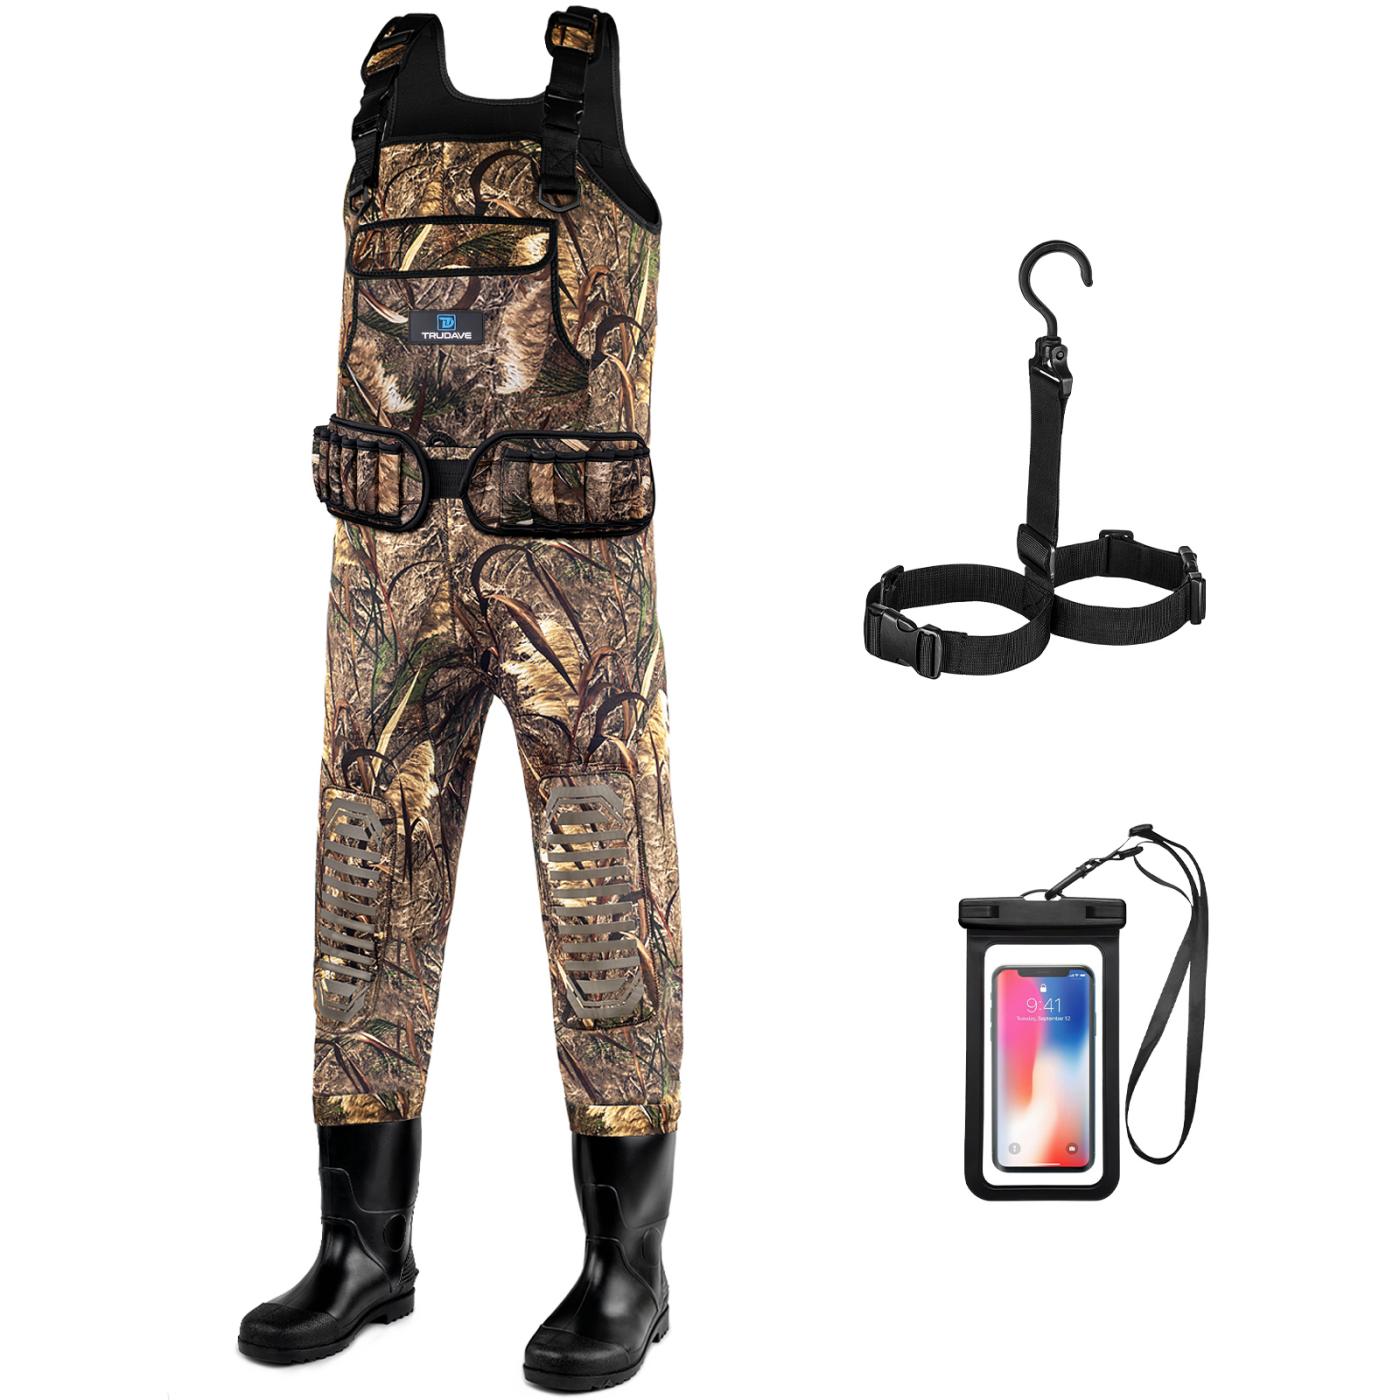 Explore High-Quality Waterproof Waders for Men & Women | Trudave ...